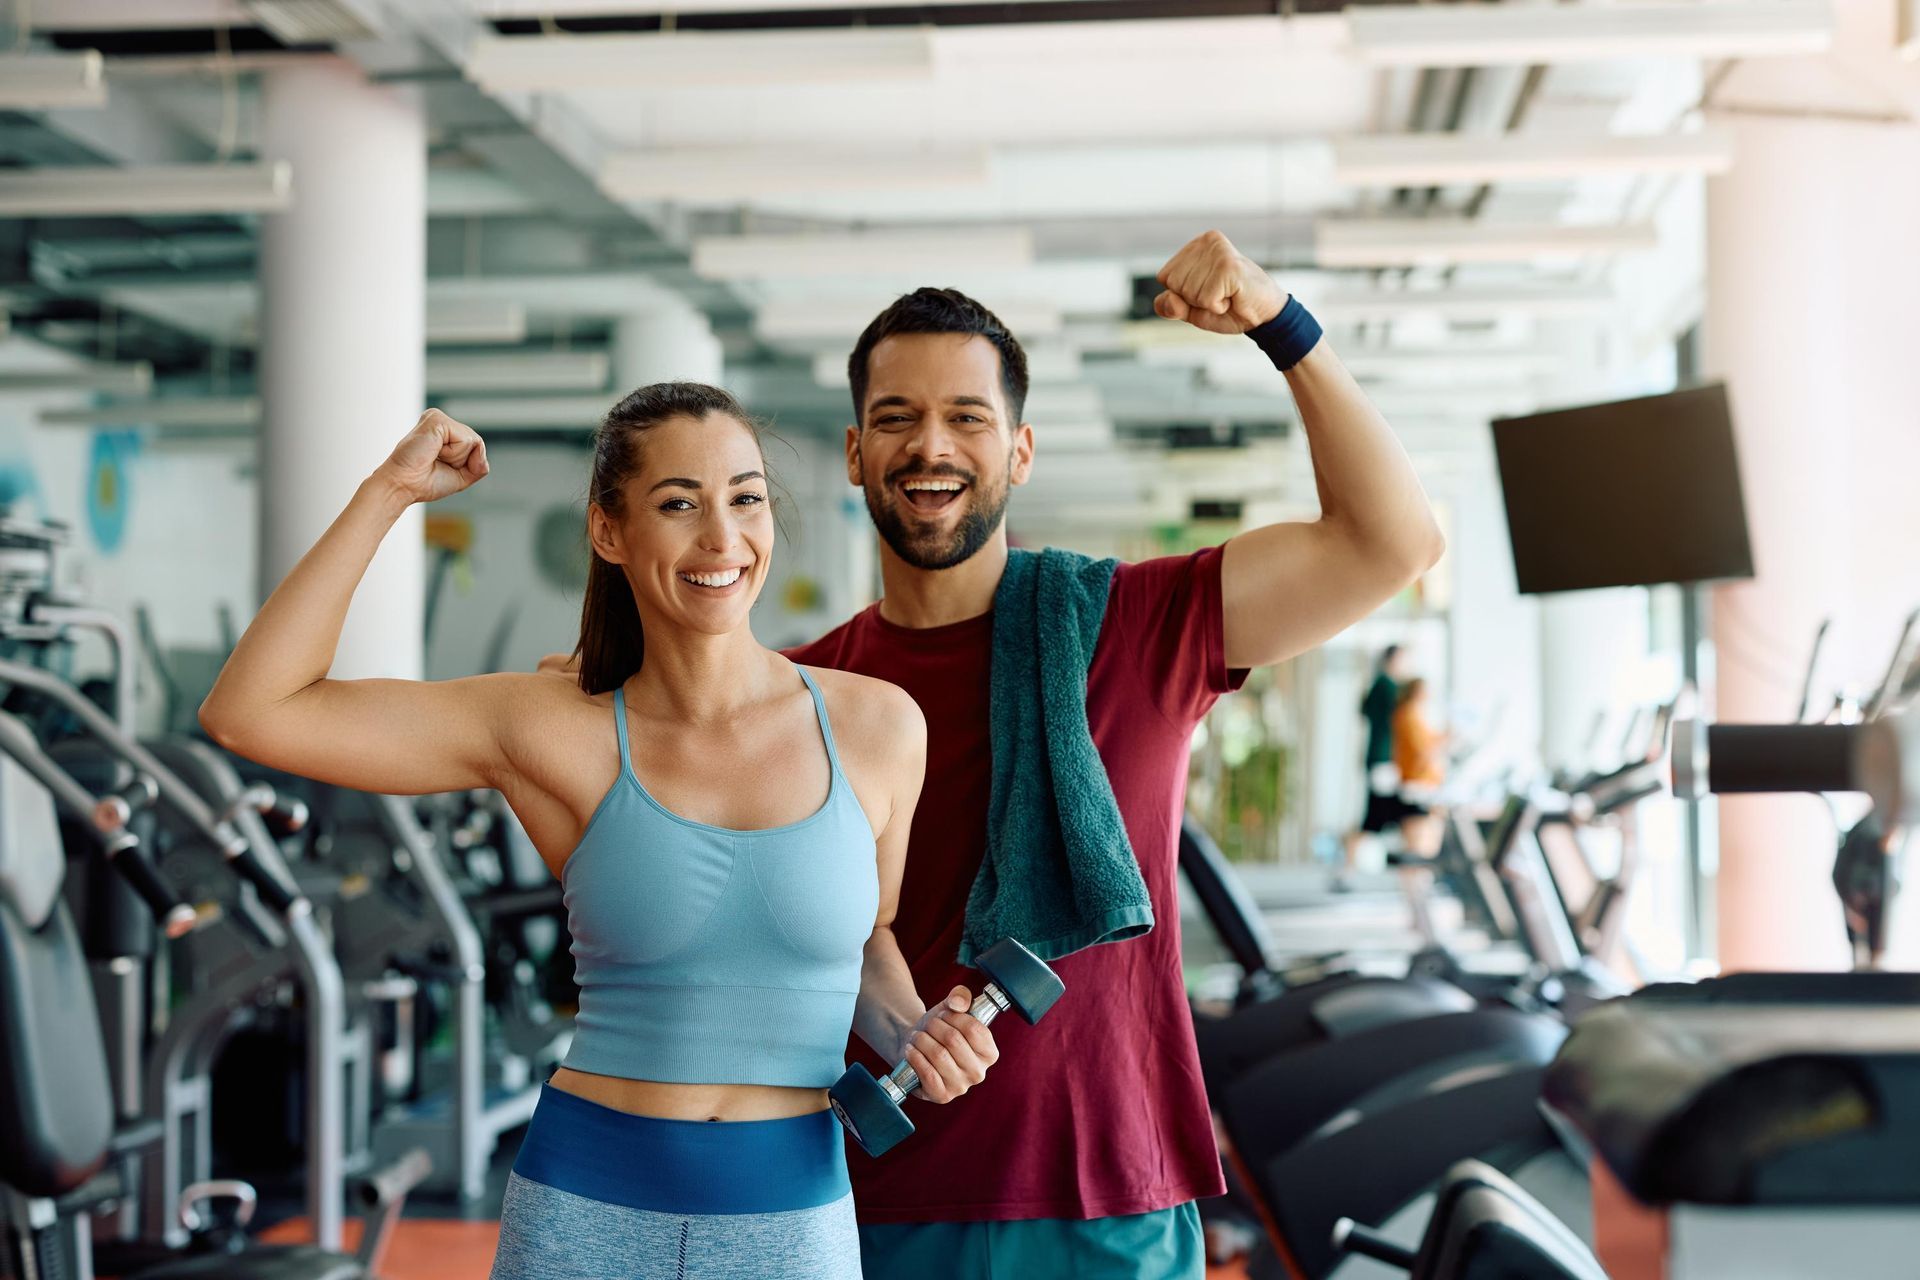 A man and a woman are flexing their muscles in a gym.